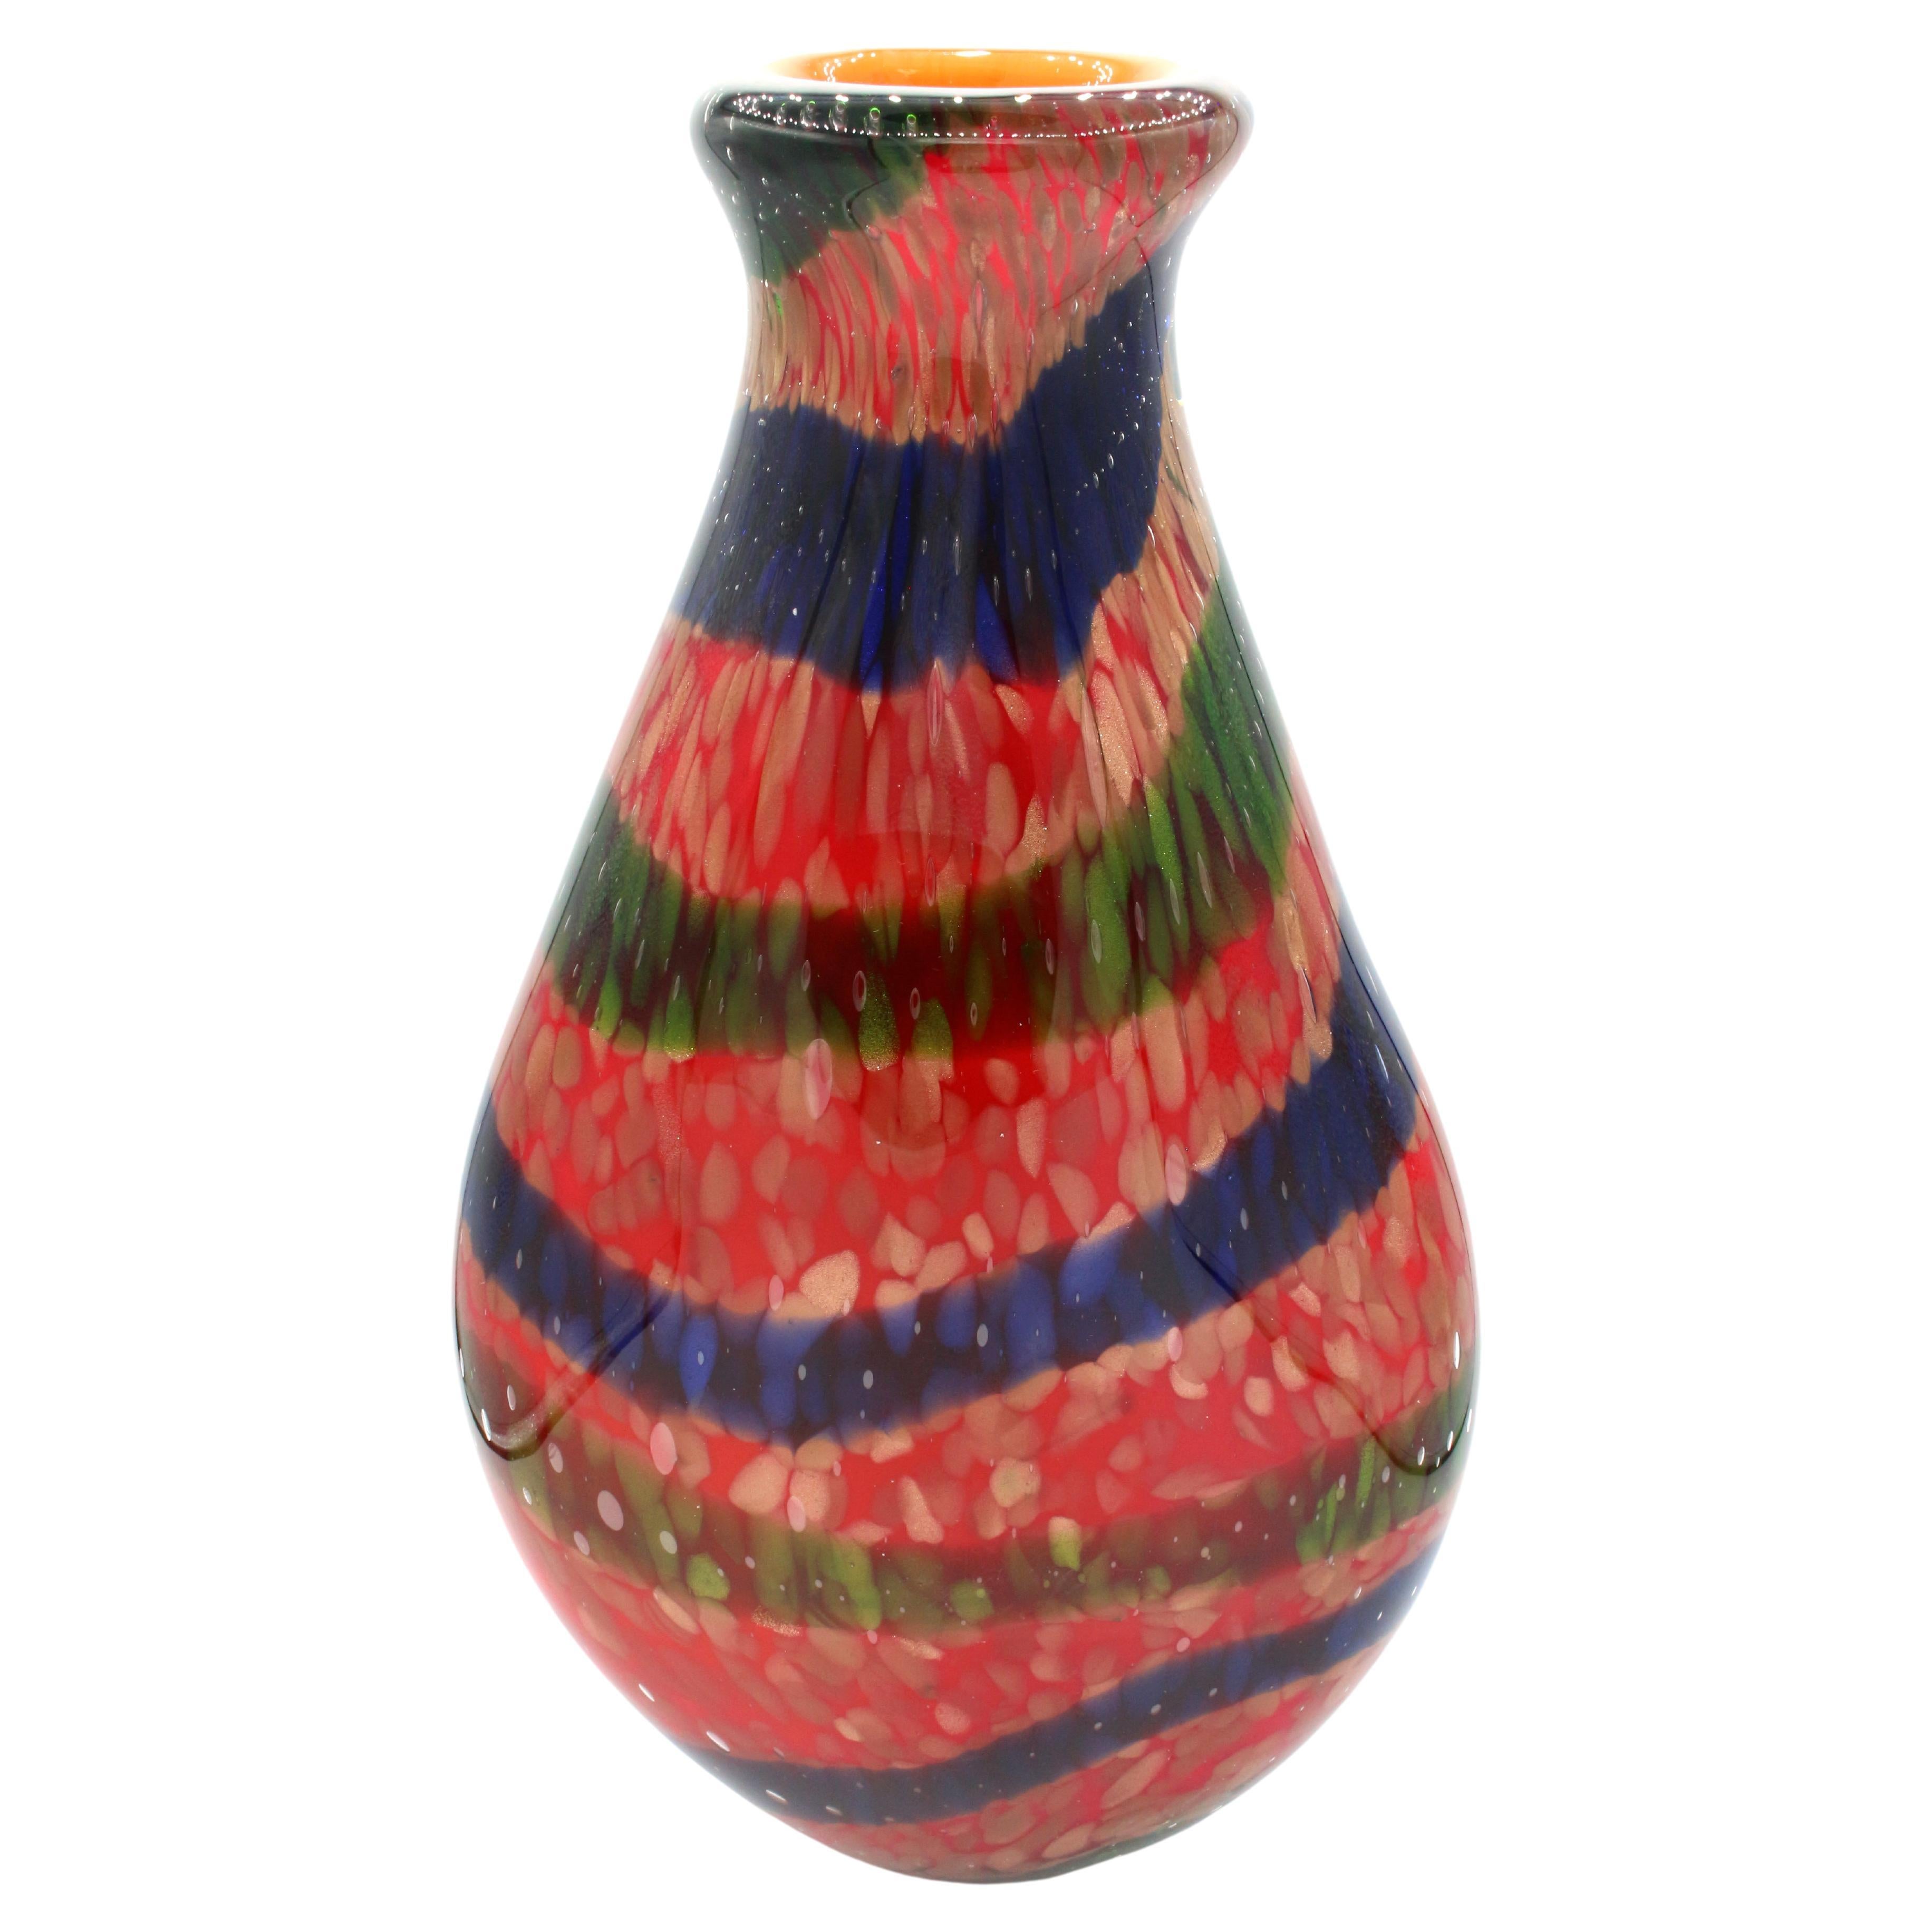 Murano Blown Glass, Cased Glass Vase of Large Flask Form, c.1960s, Italian